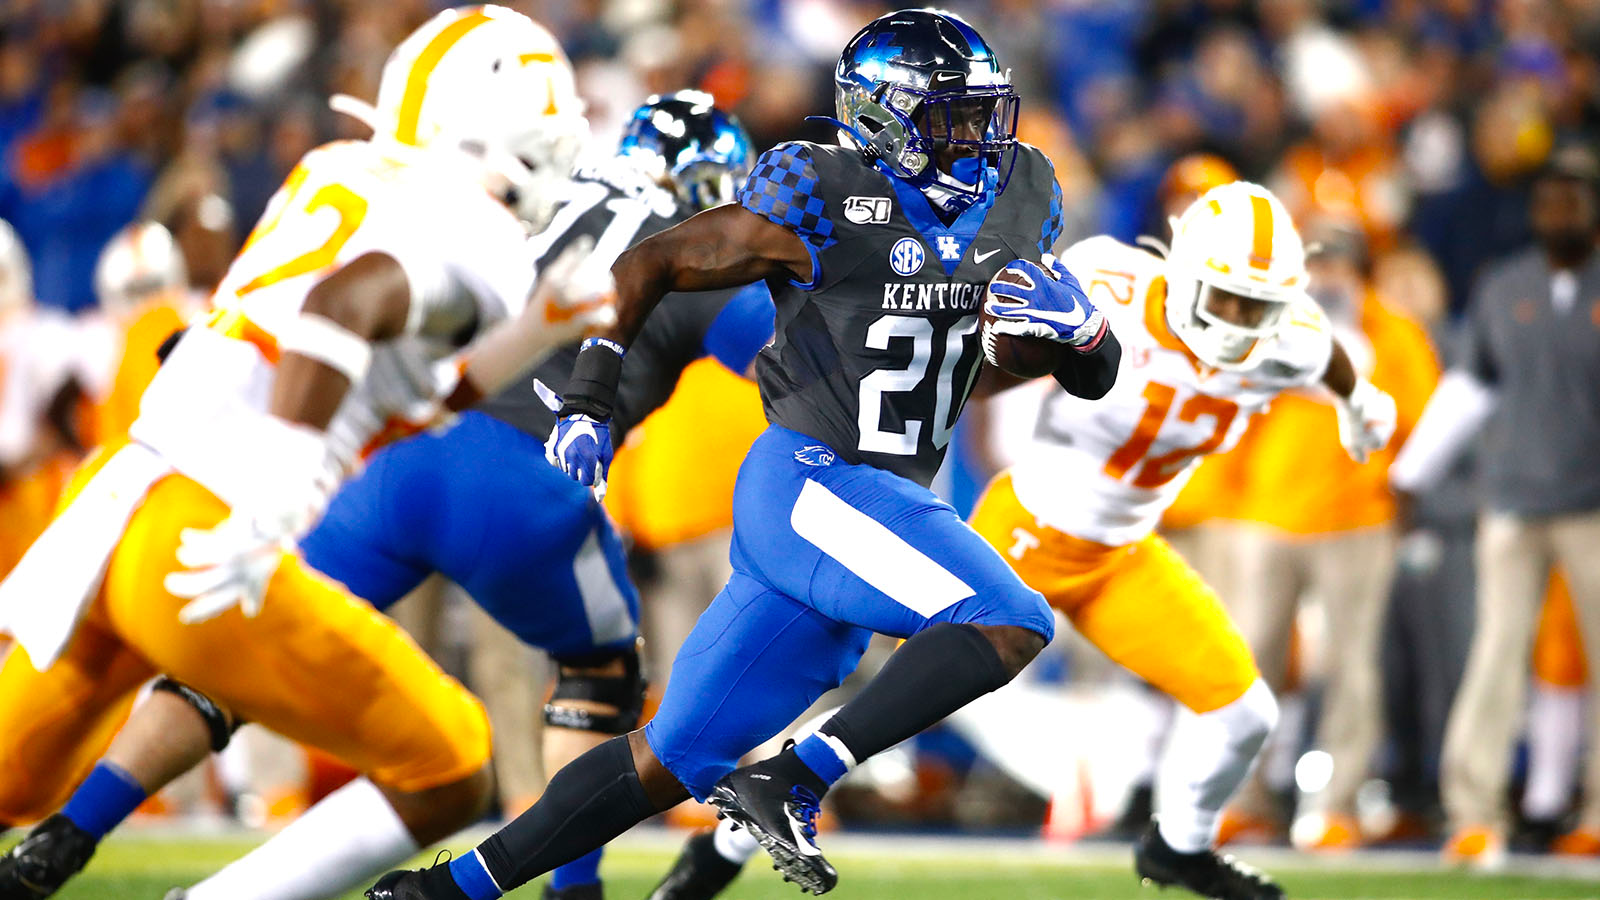 Kentucky Comes Up Just Short, Falling to Tennessee